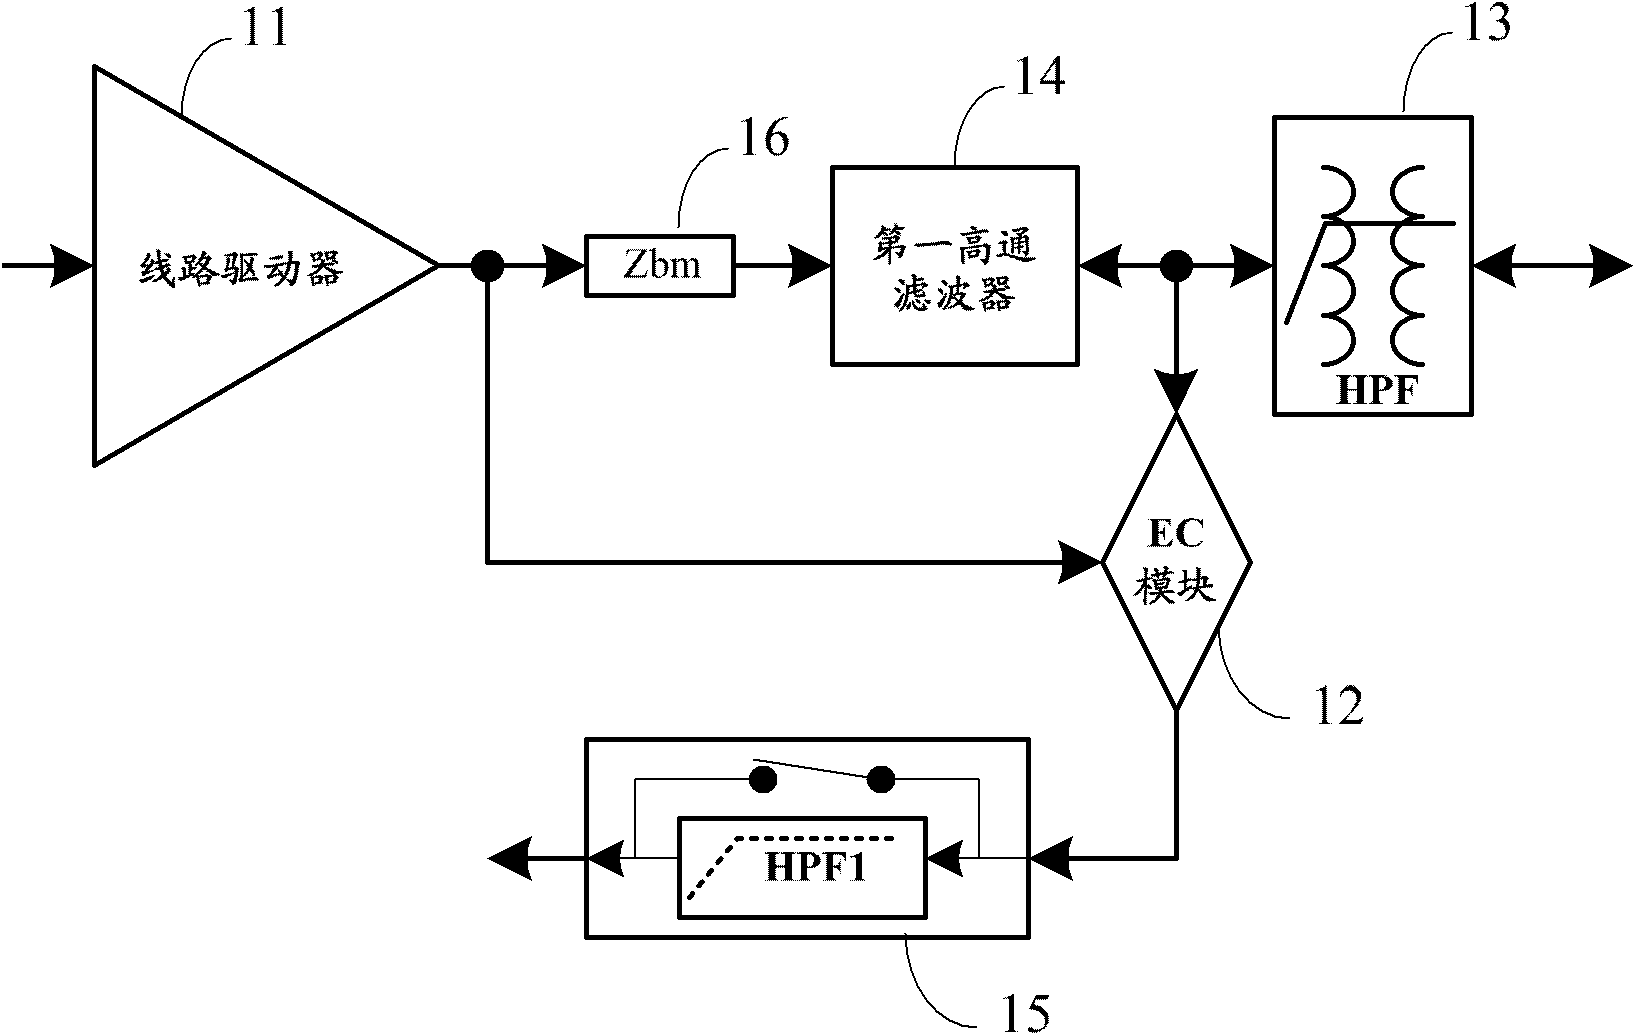 Circuit and equipment of digital subscriber line